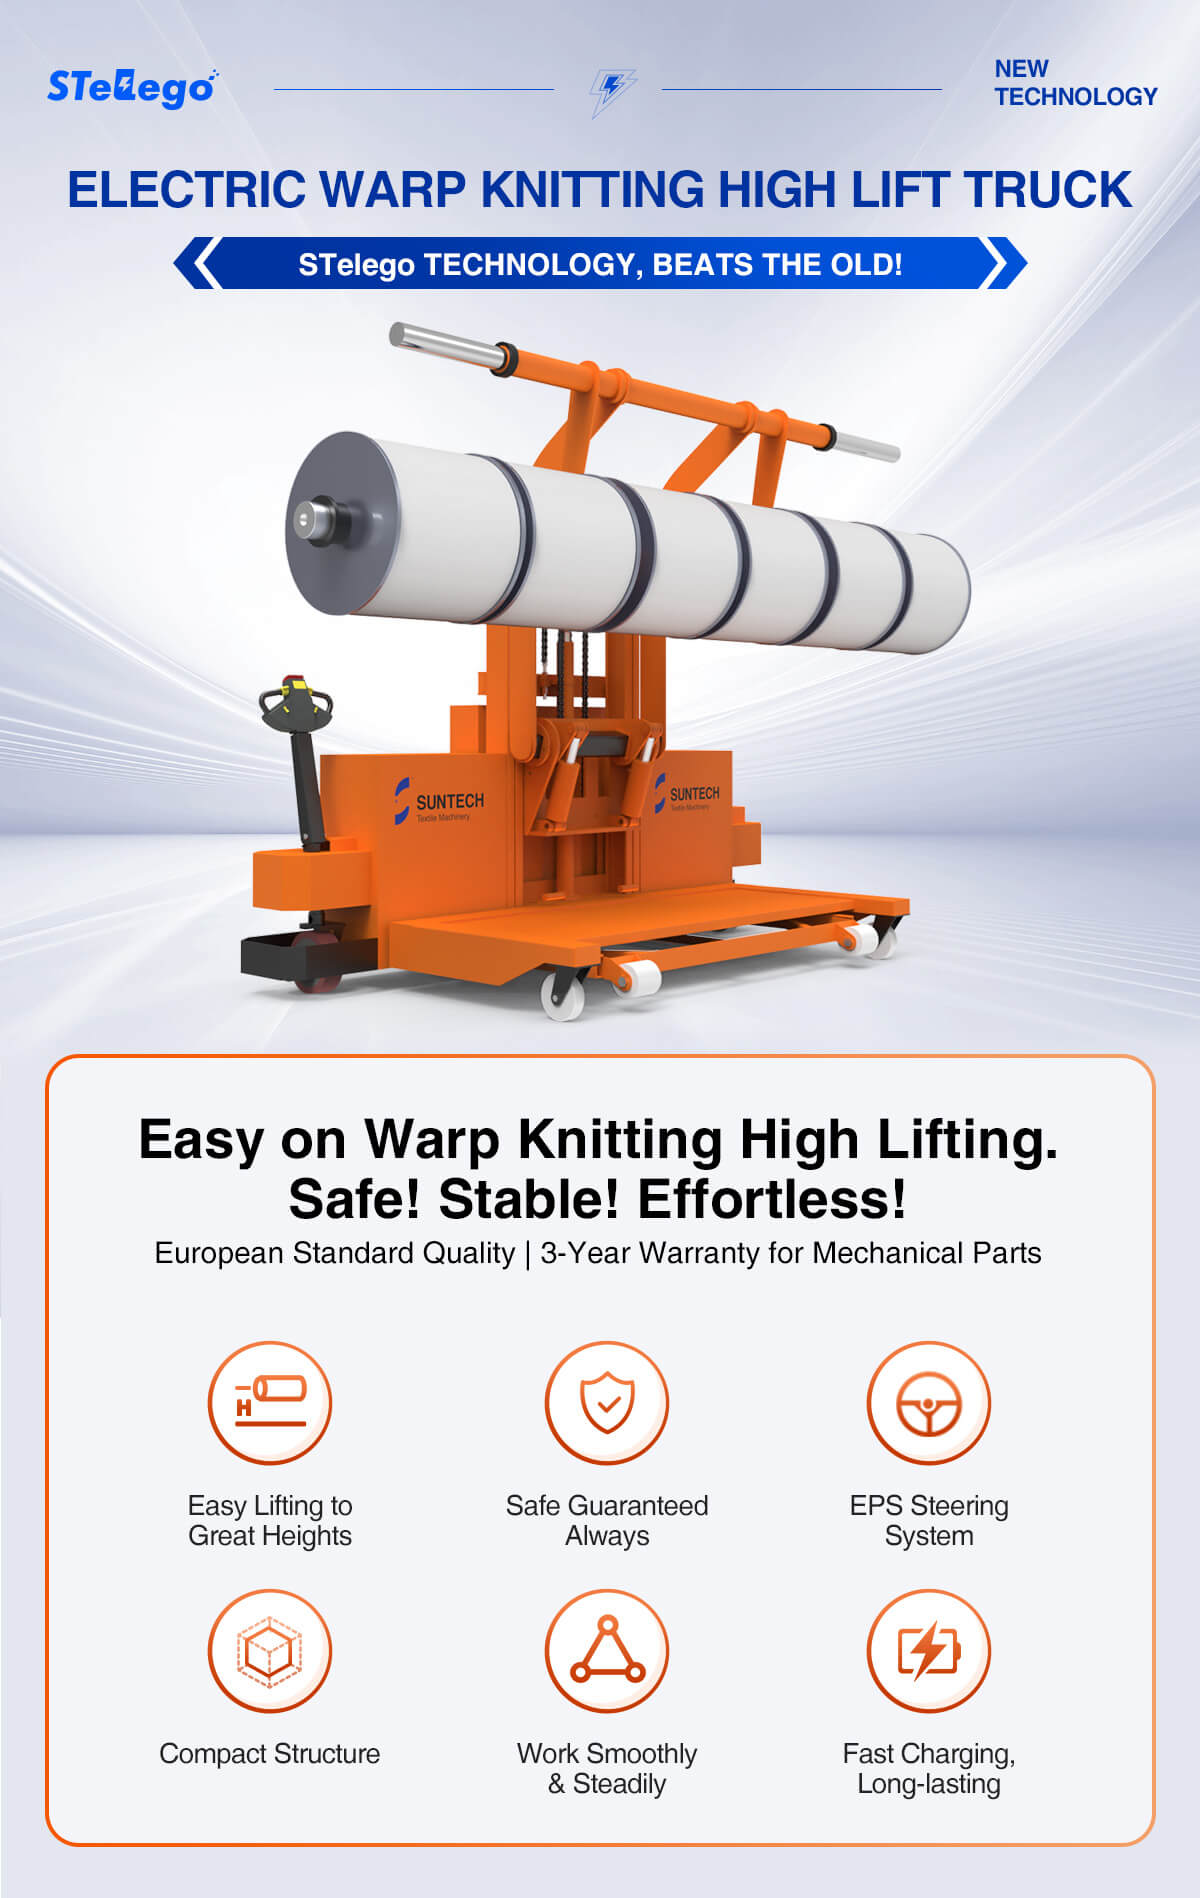 Electric Warp Knitting High Lift Trolley features